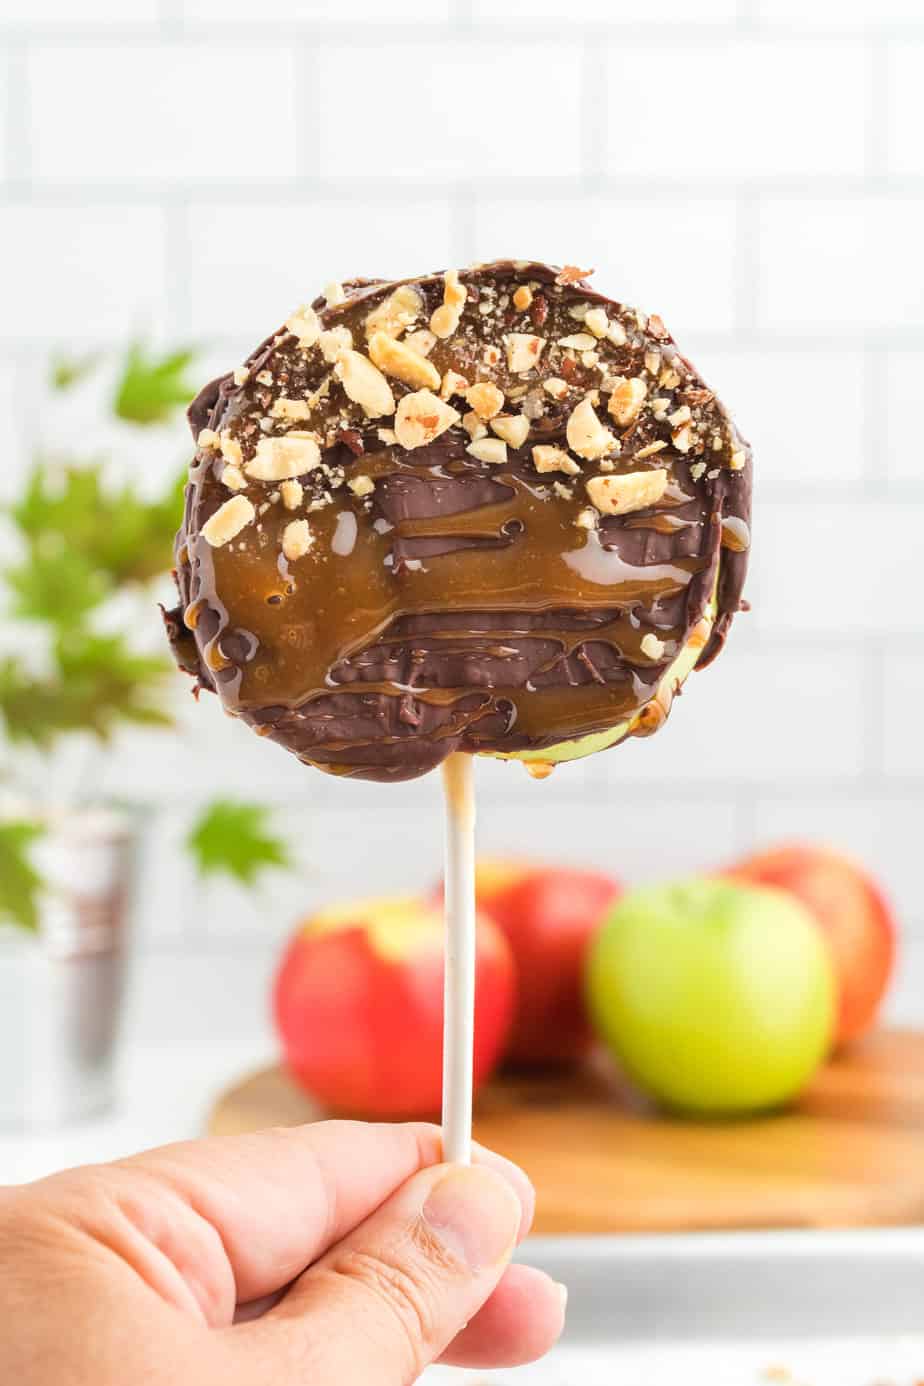 A hand holds a slice of apple on a stick covered in chocolate, caramel and peanuts in a kitchen from the side with more apples on the counter in the background.